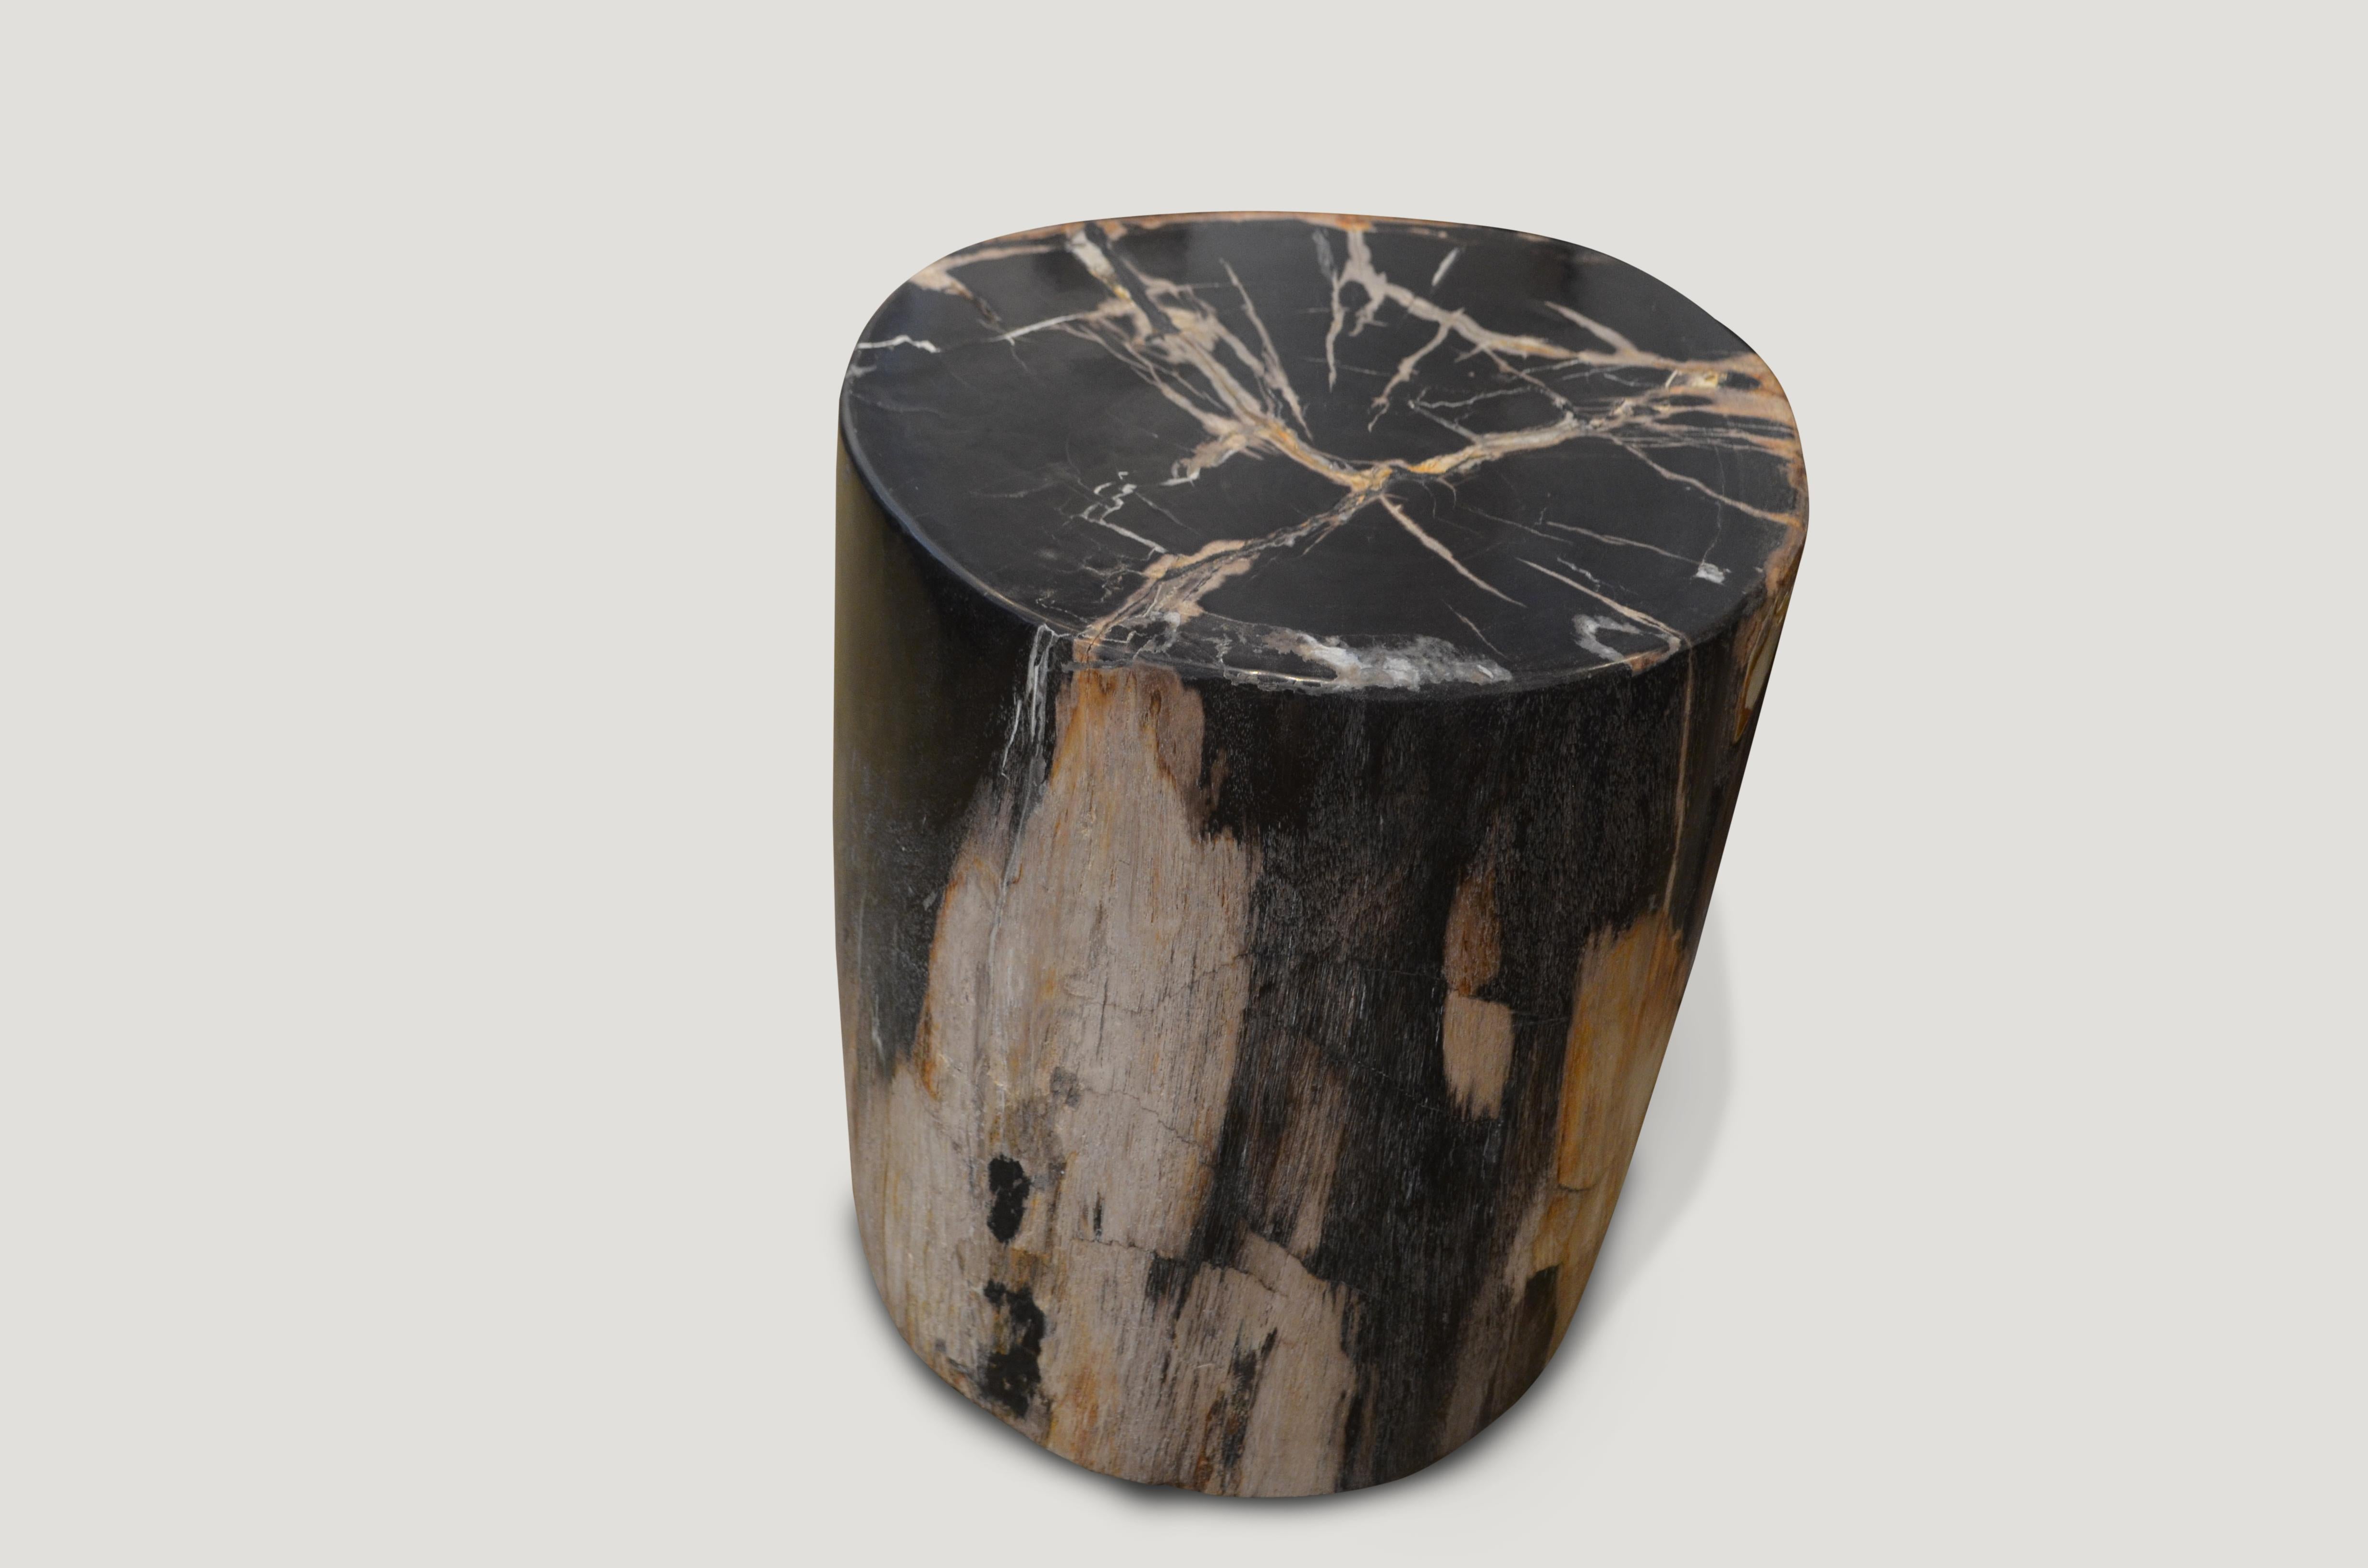 Striking contrasting color tones on this petrified wood side table. 

We source the highest quality petrified wood available. Each piece is hand-selected and highly polished with minimal cracks. Petrified wood is extremely versatile – even great